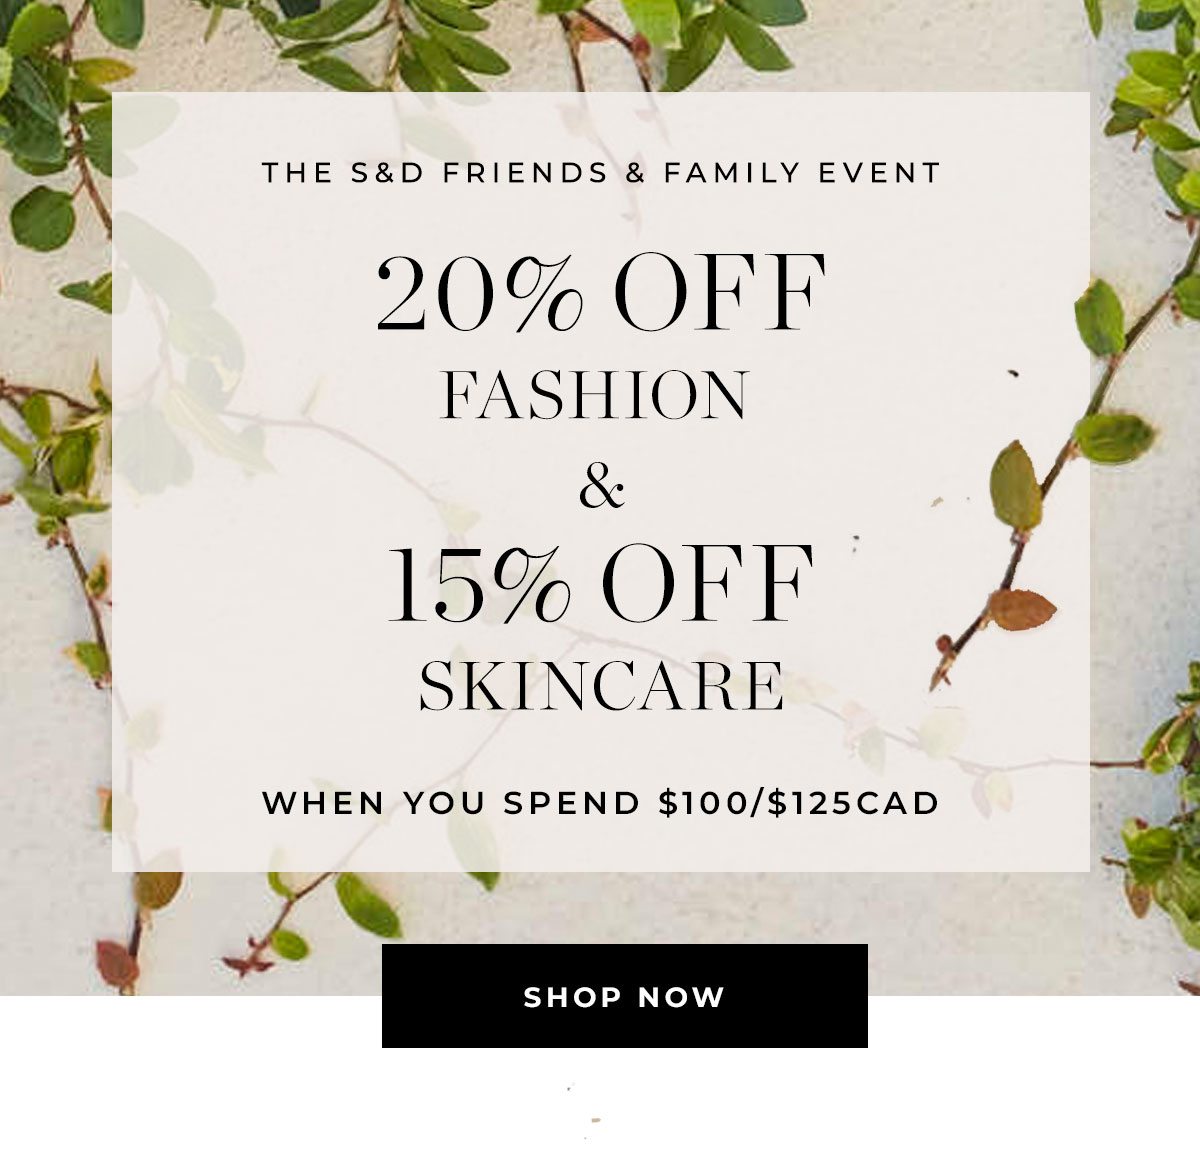 The S&D Friends & Family Event. 20% Off Fashion. 15% Off Skincare. Shop Now.